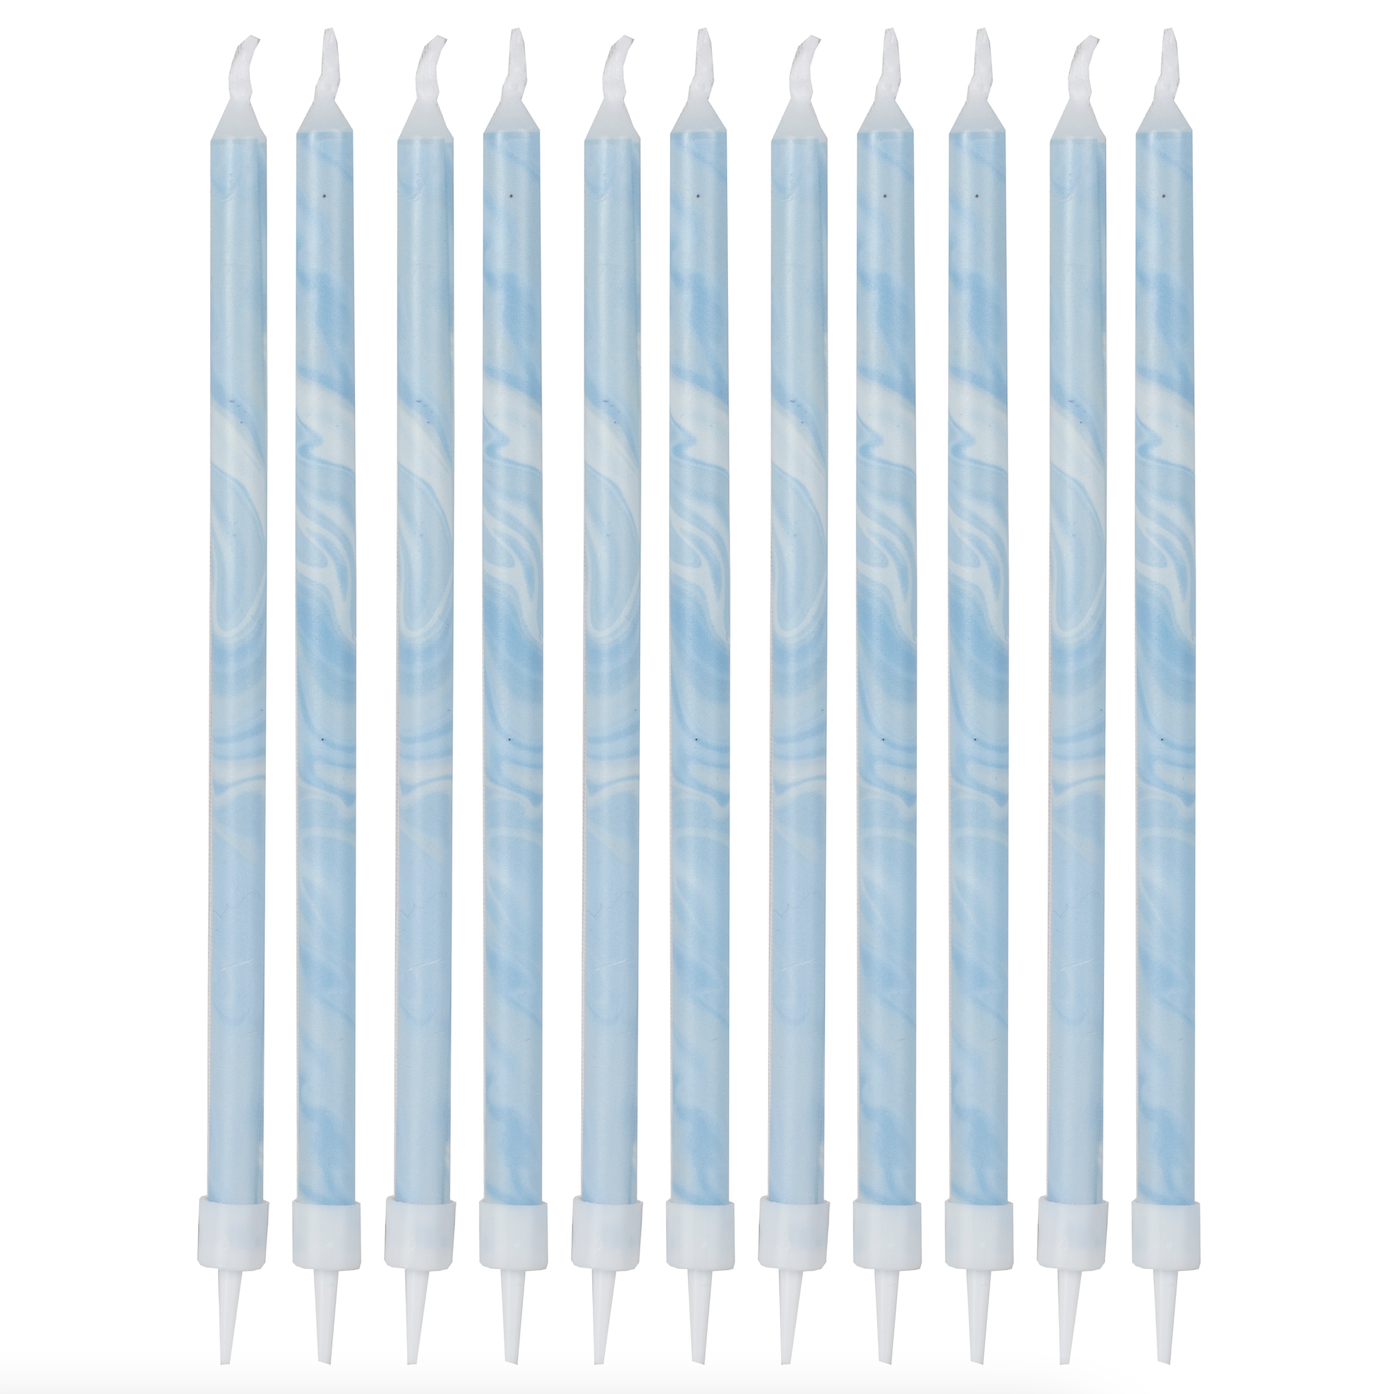 Blue Tall Marble Birthday Cake Candles